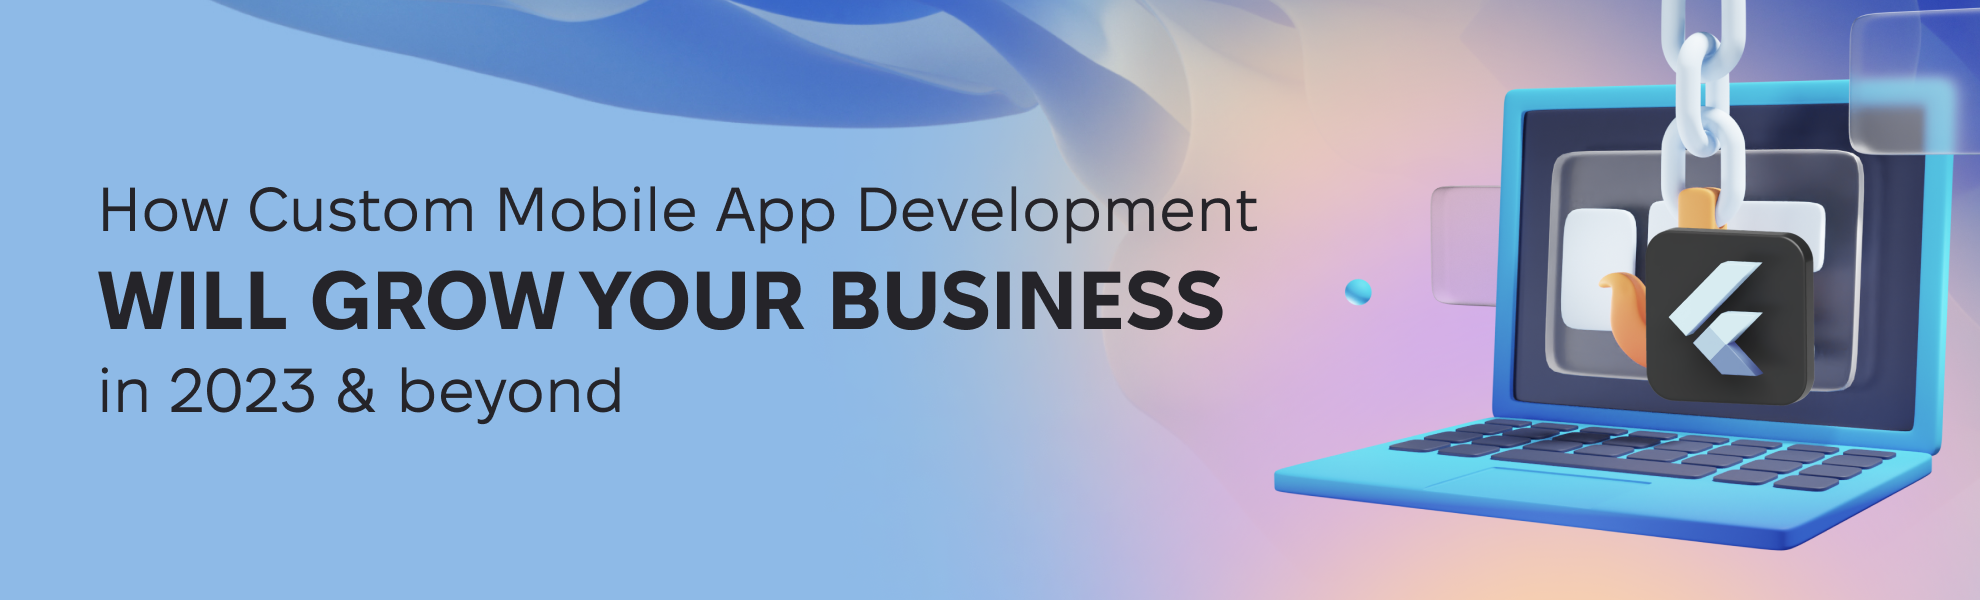 How Can Mobile Apps Grow Your Business in 2023? - Benefits of Mobile App Development for Startups